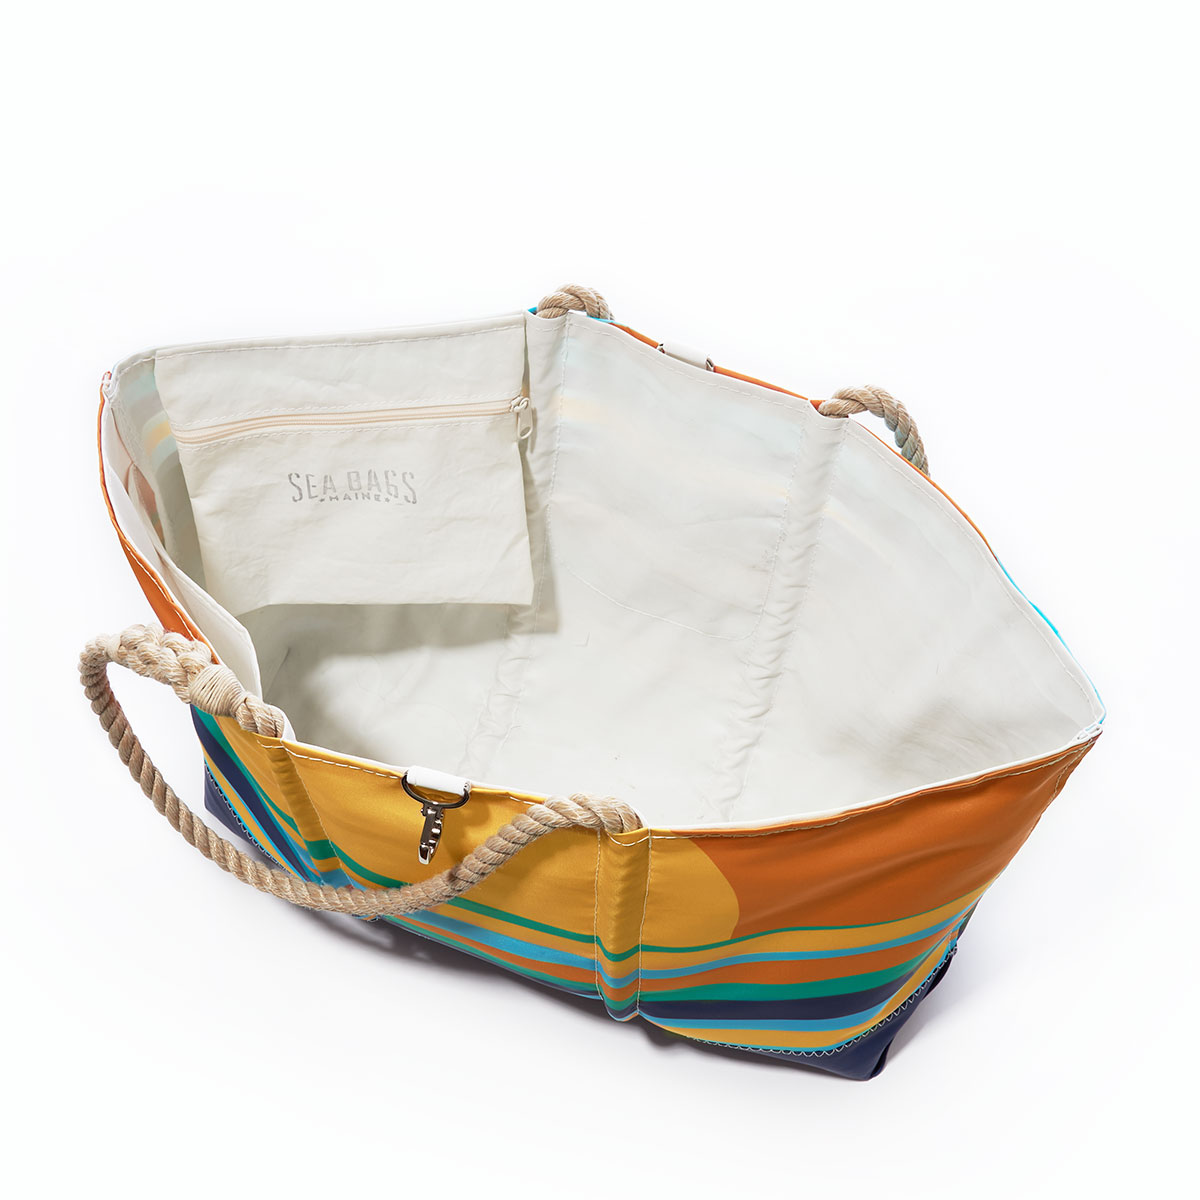 inside view of a tote with multicolor wavy ocean stripes sit under a rising sun printed on a recycled sail cloth tote with hemp rope handles